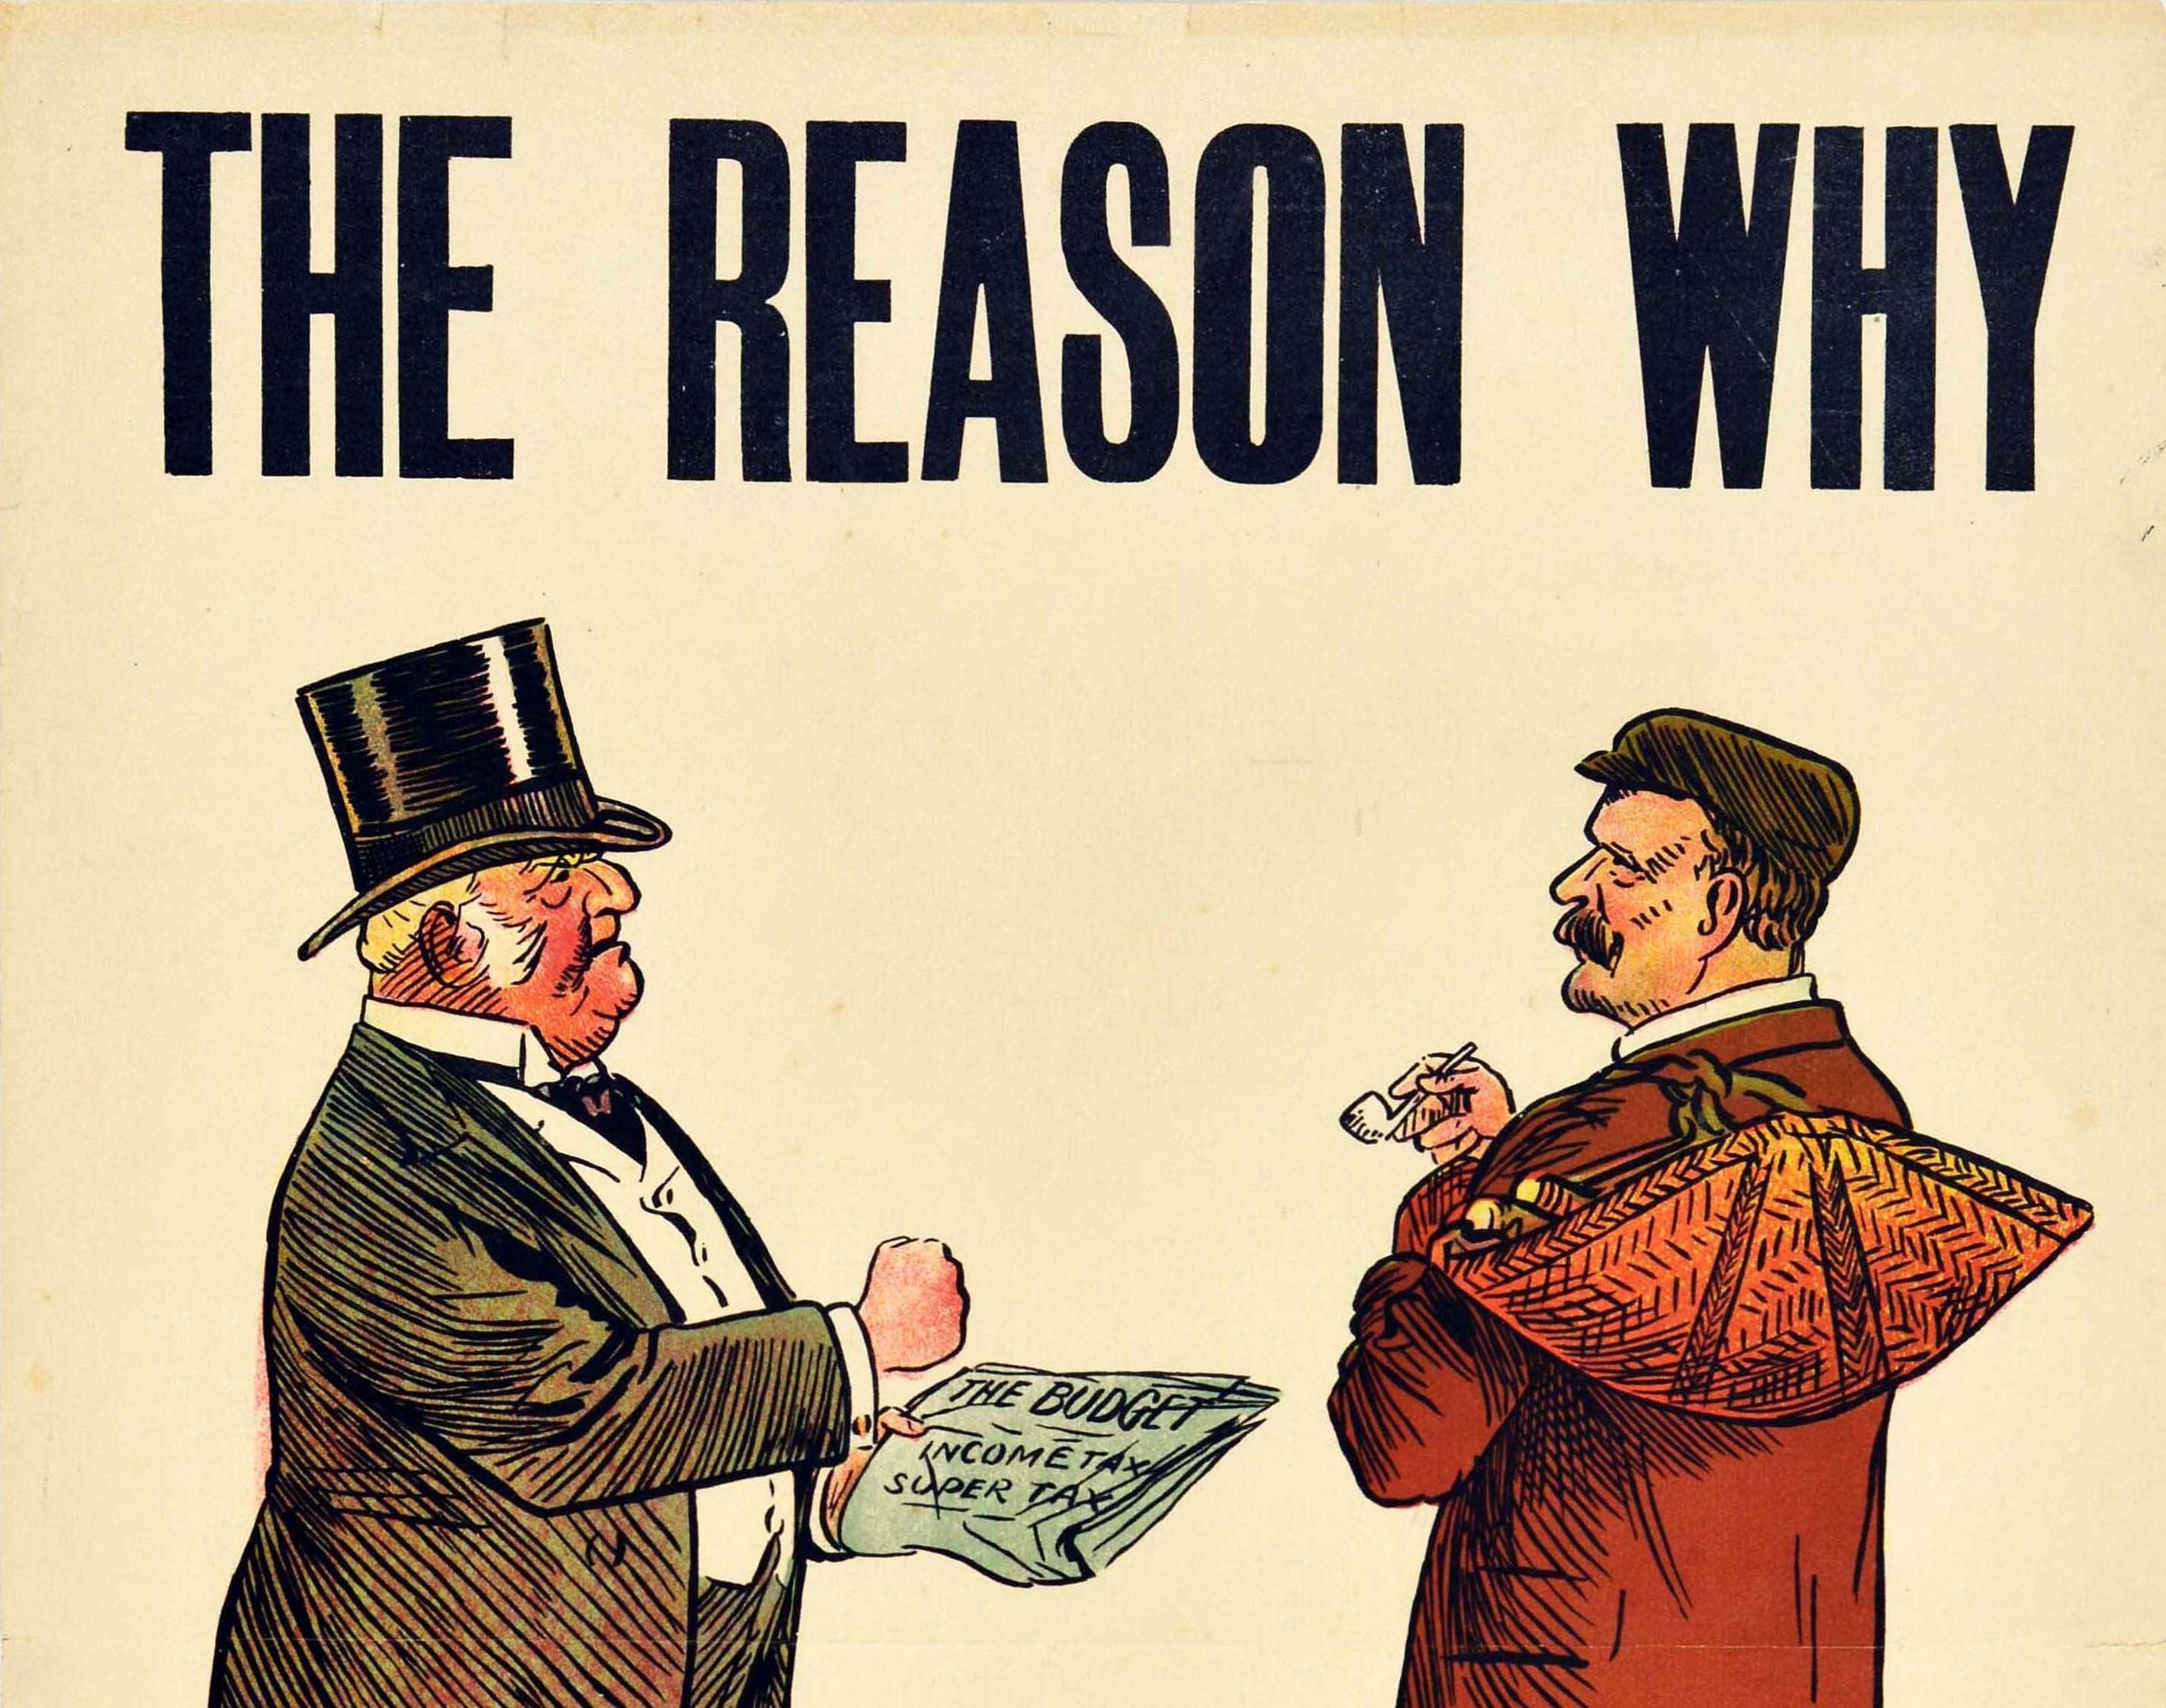 Original antique political election propaganda poster issued by the Liberal Party - The Reason Why - featuring an illustration of two men, one wearing a suit and top hat clenching his fist and holding a paper that reads - The Budget Income tax Super